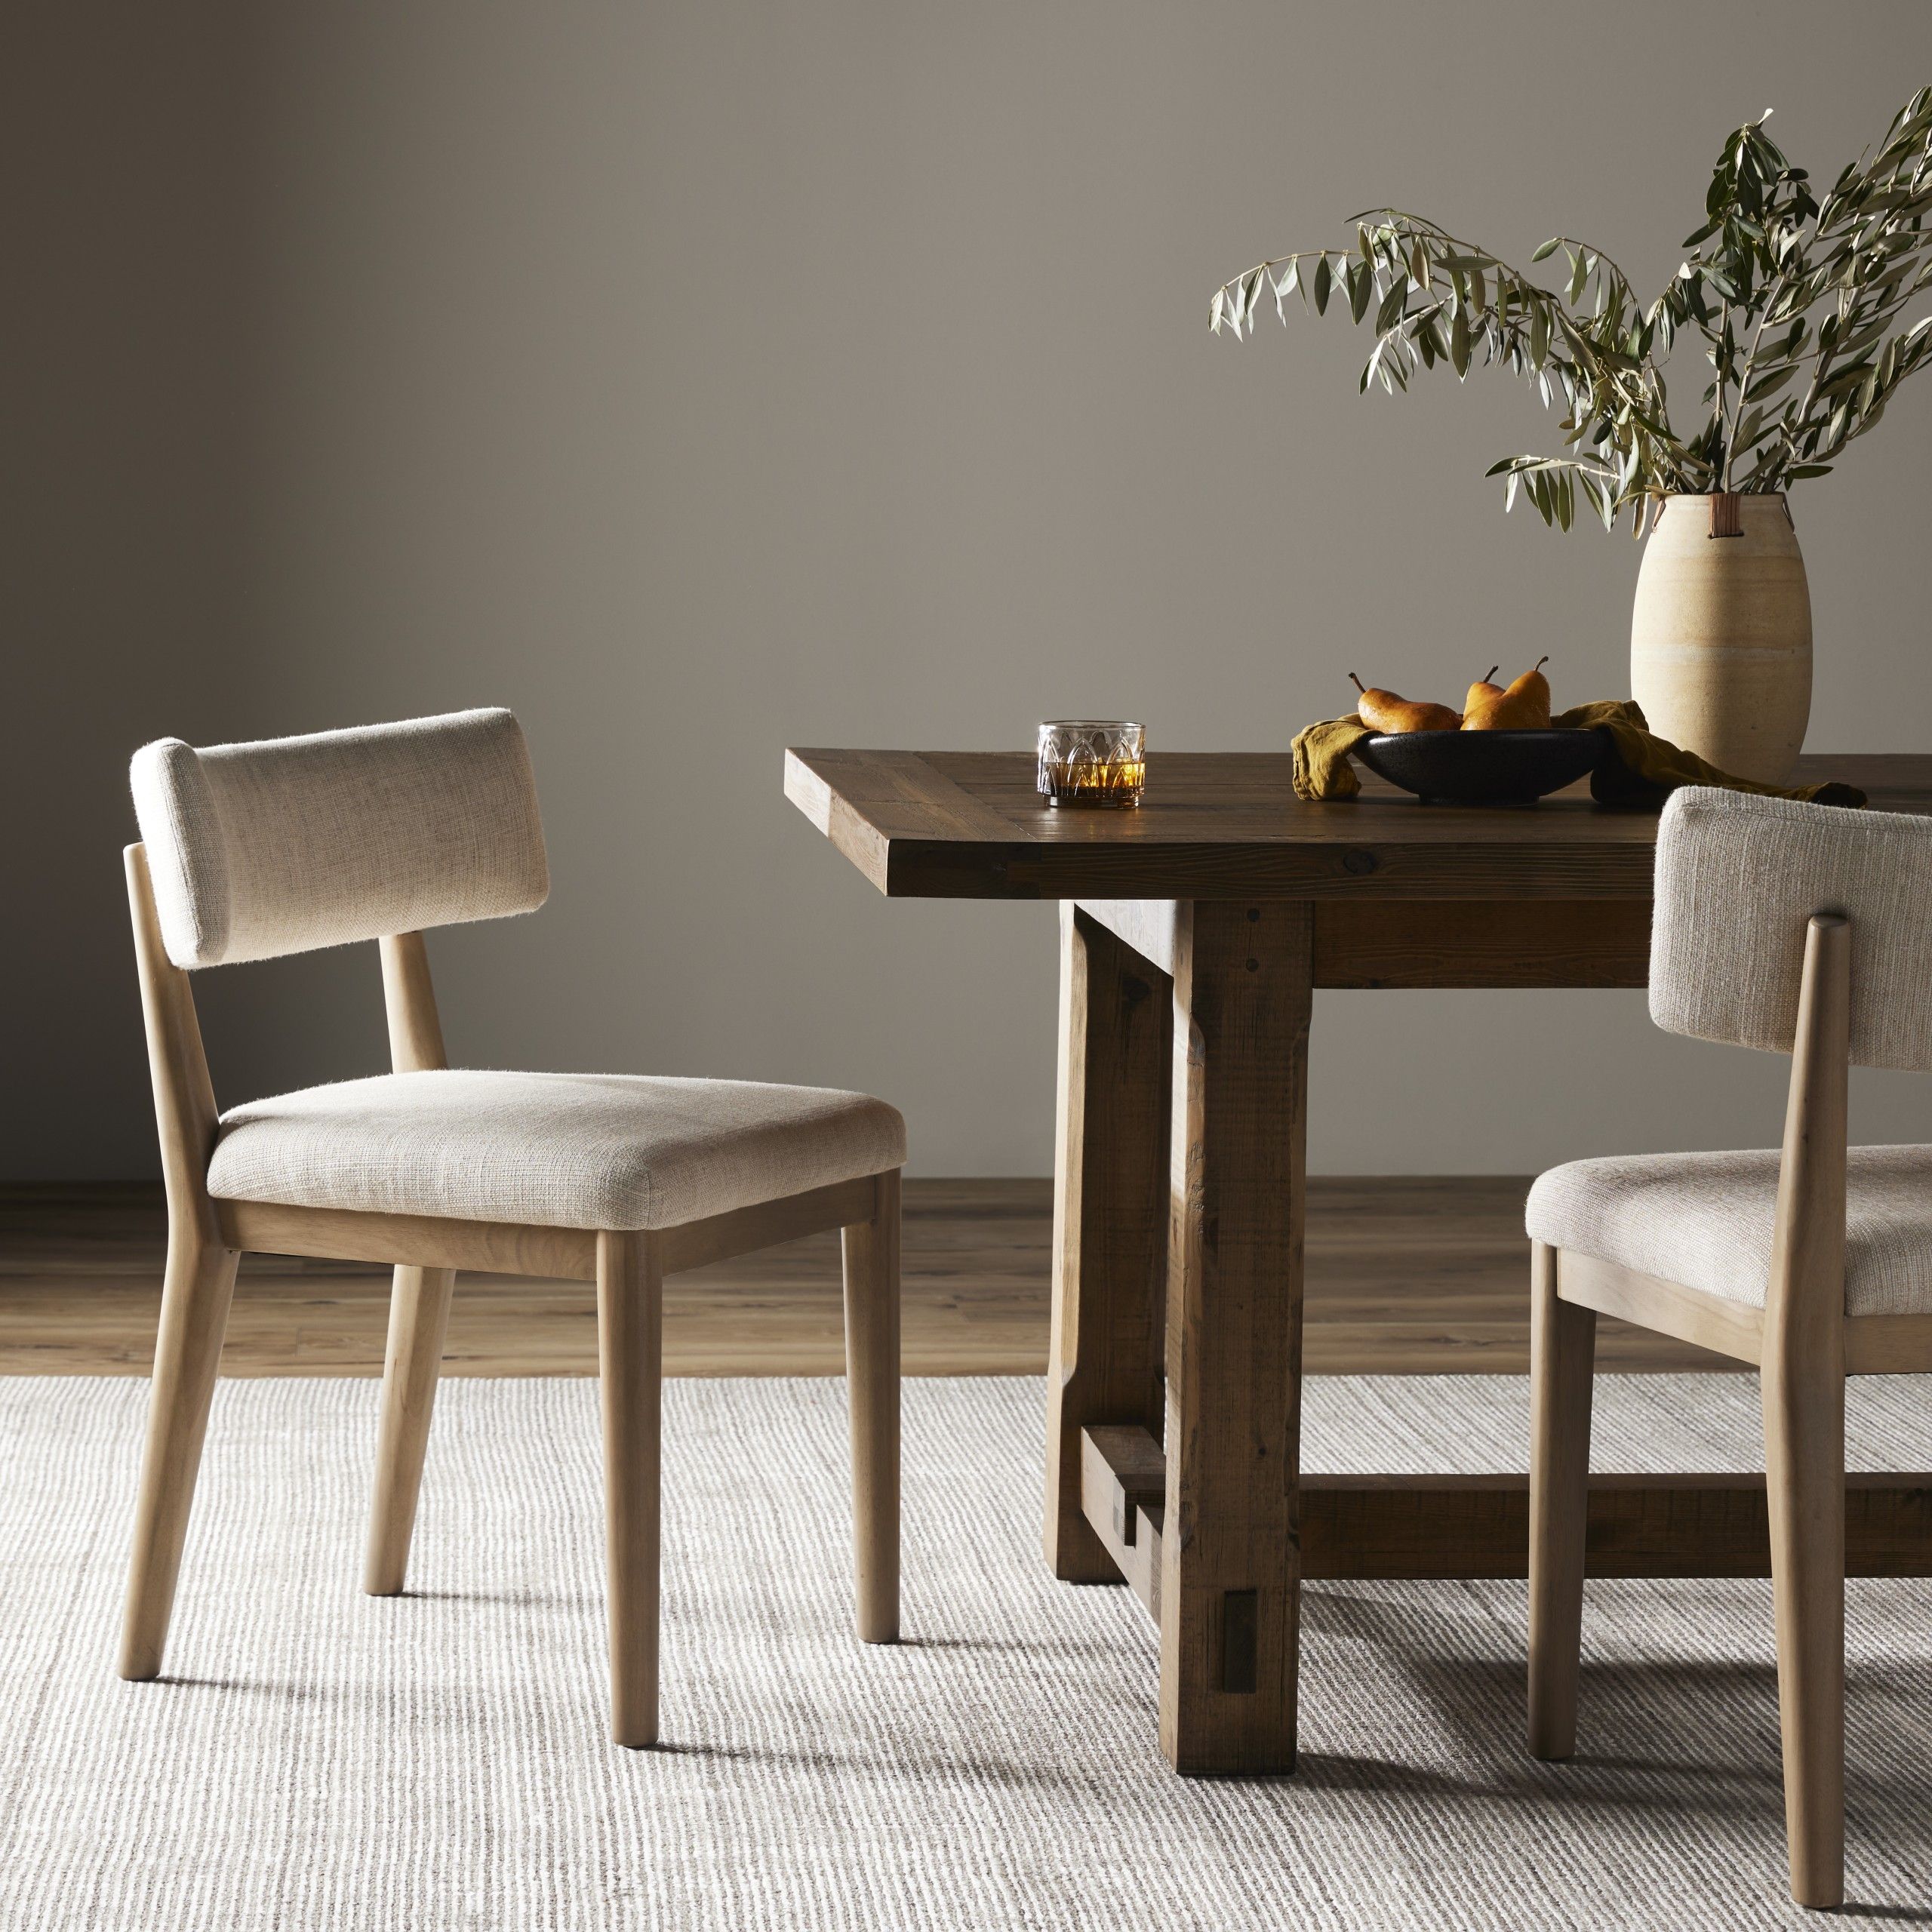 Cardell Dining Chair - Essence Natural next to dining table